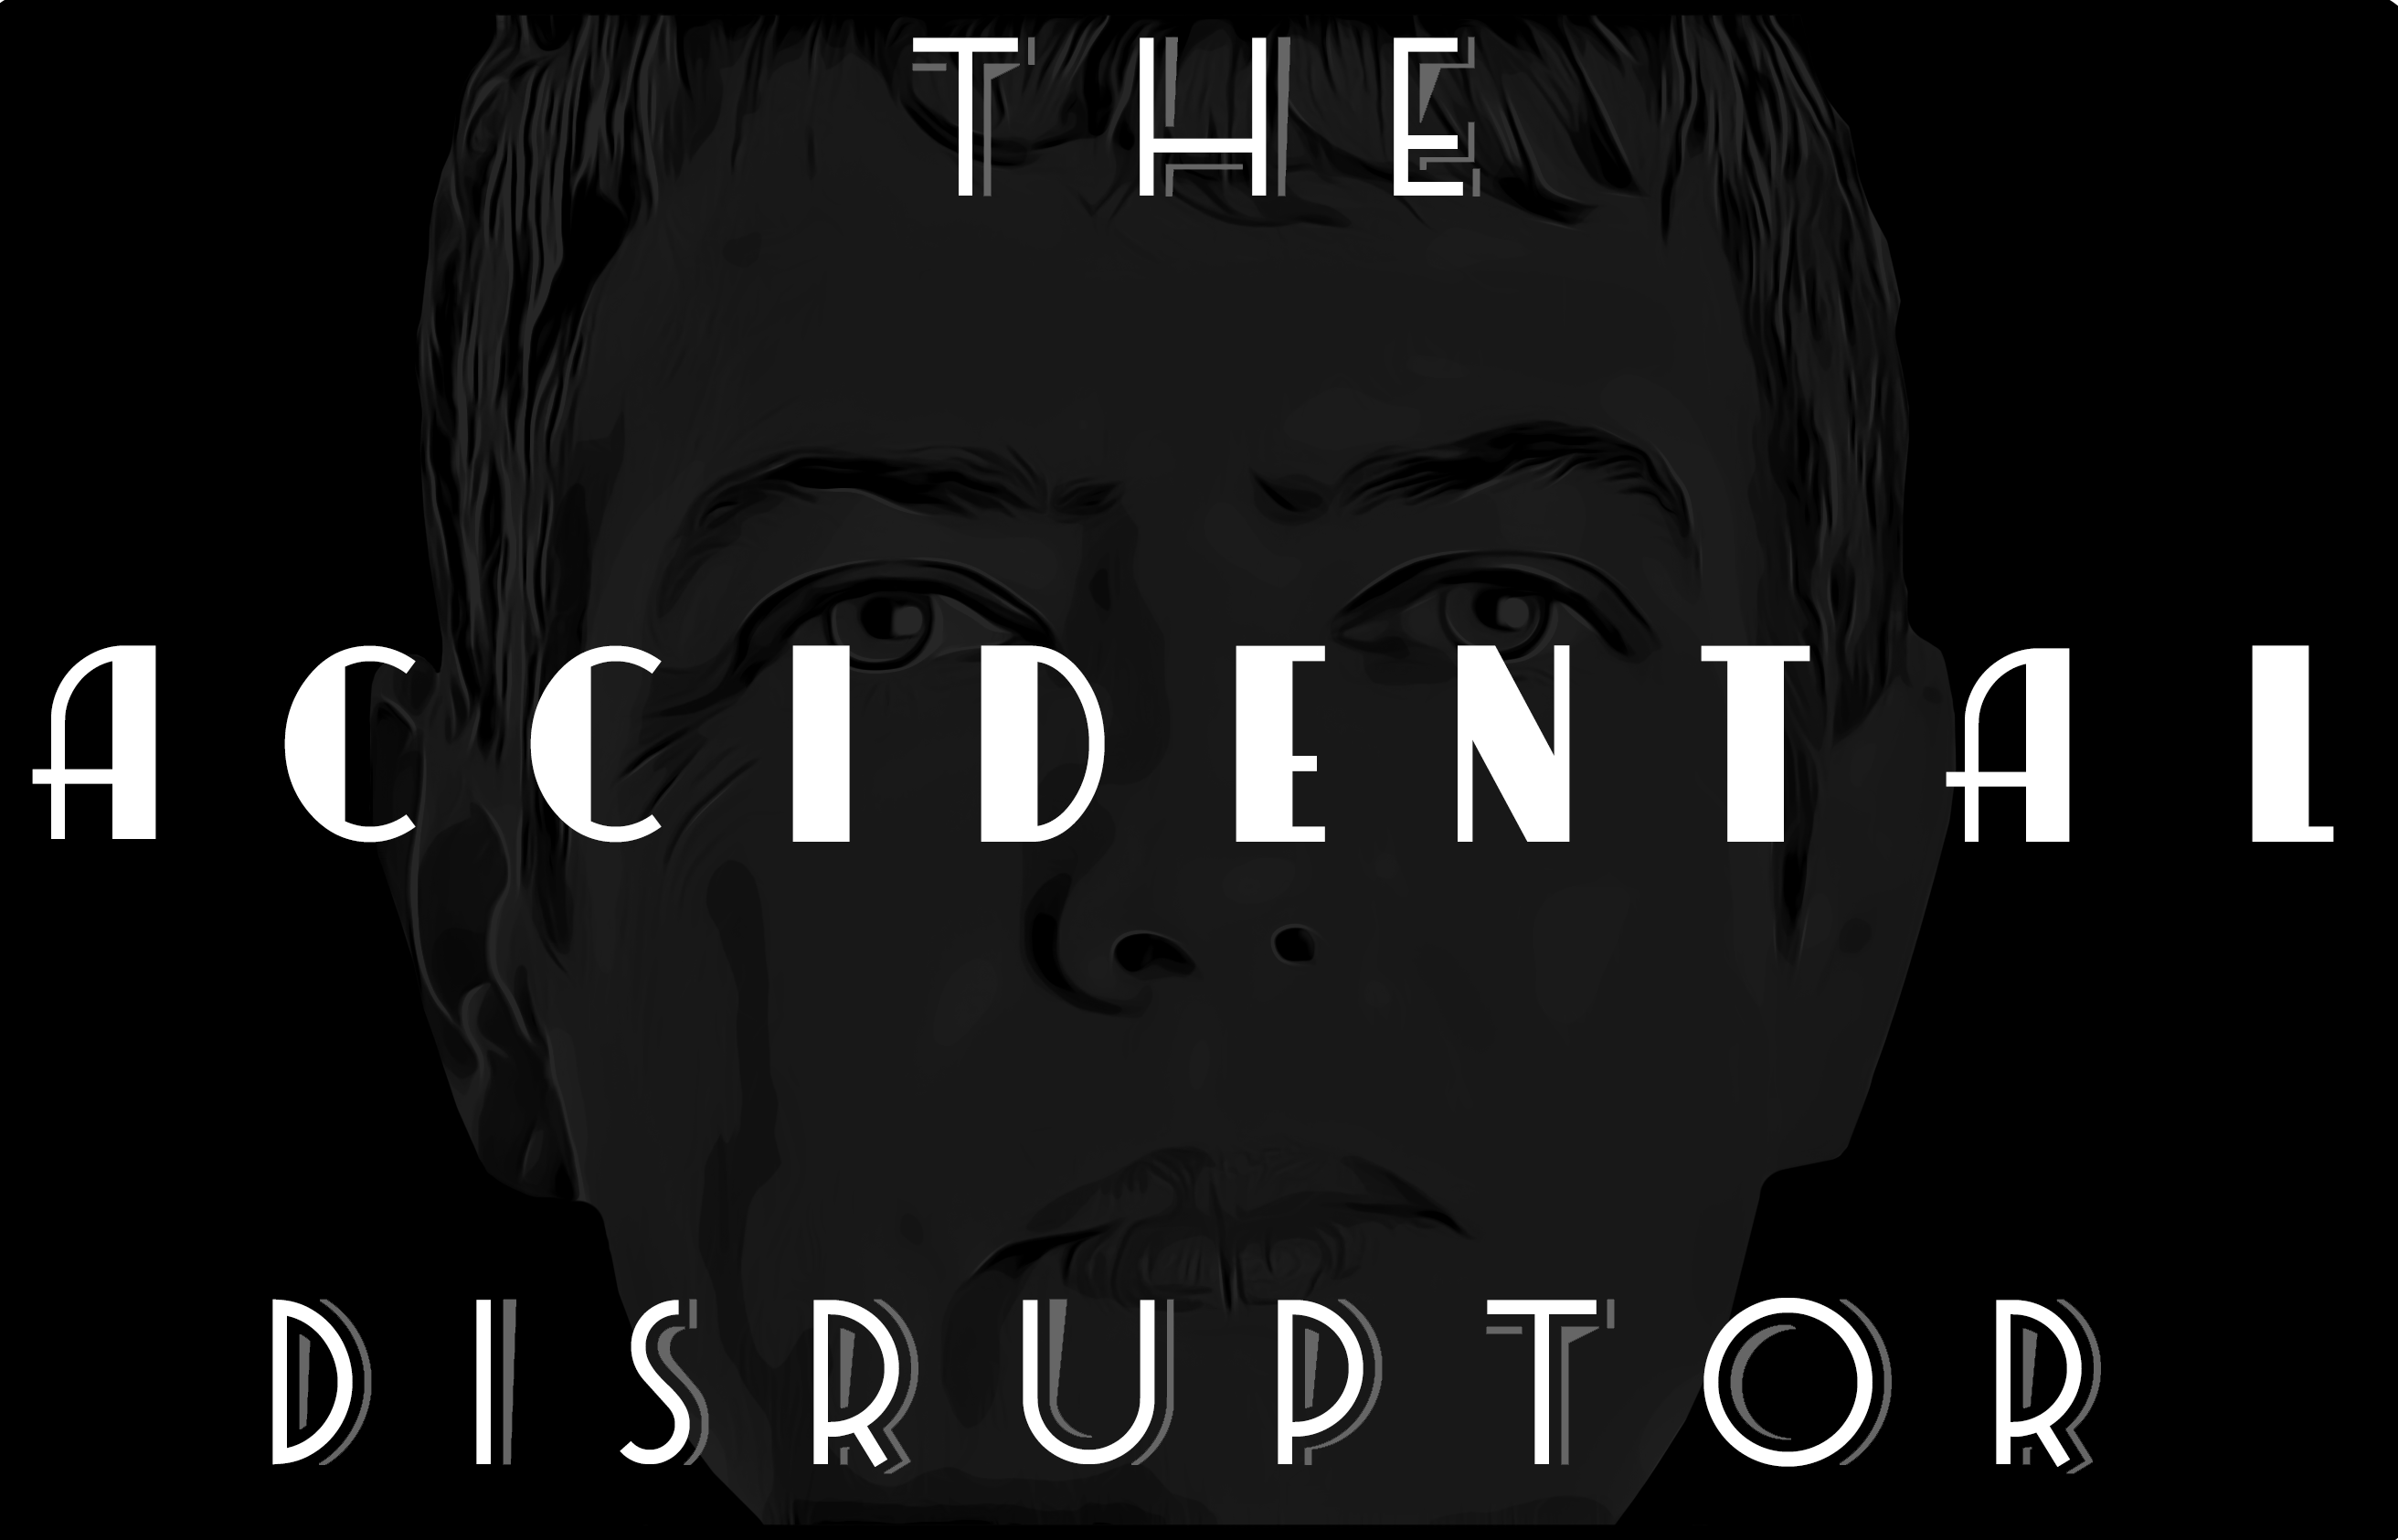 The Accidental Disruptor